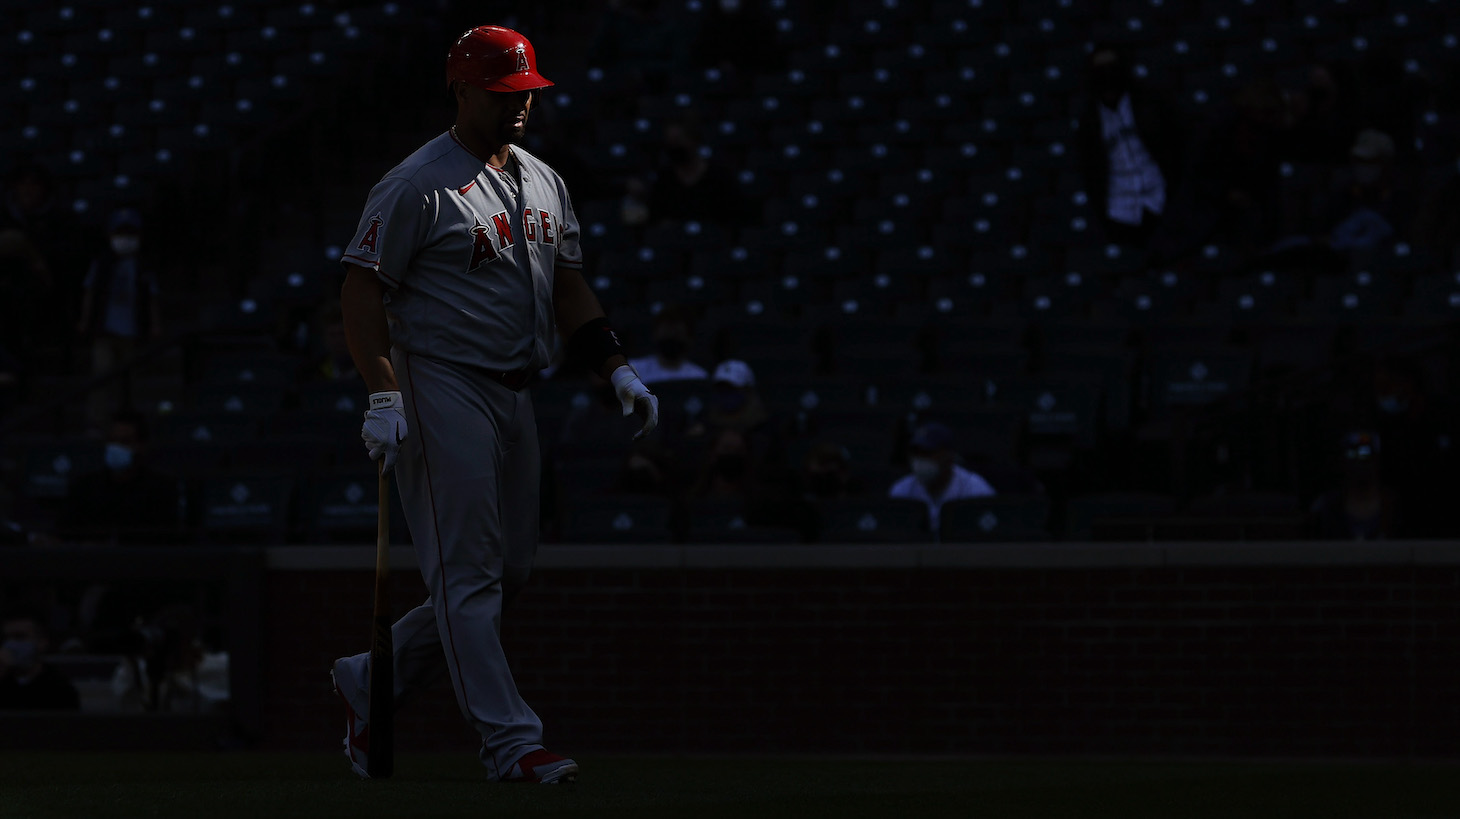 SEATTLE, WASHINGTON - MAY 02: Albert Pujols #5 of the Los Angeles Angels walks to the dugout after striking out against the Seattle Mariners ninth inning at T-Mobile Park on May 02, 2021 in Seattle, Washington. (Photo by Steph Chambers/Getty Images)